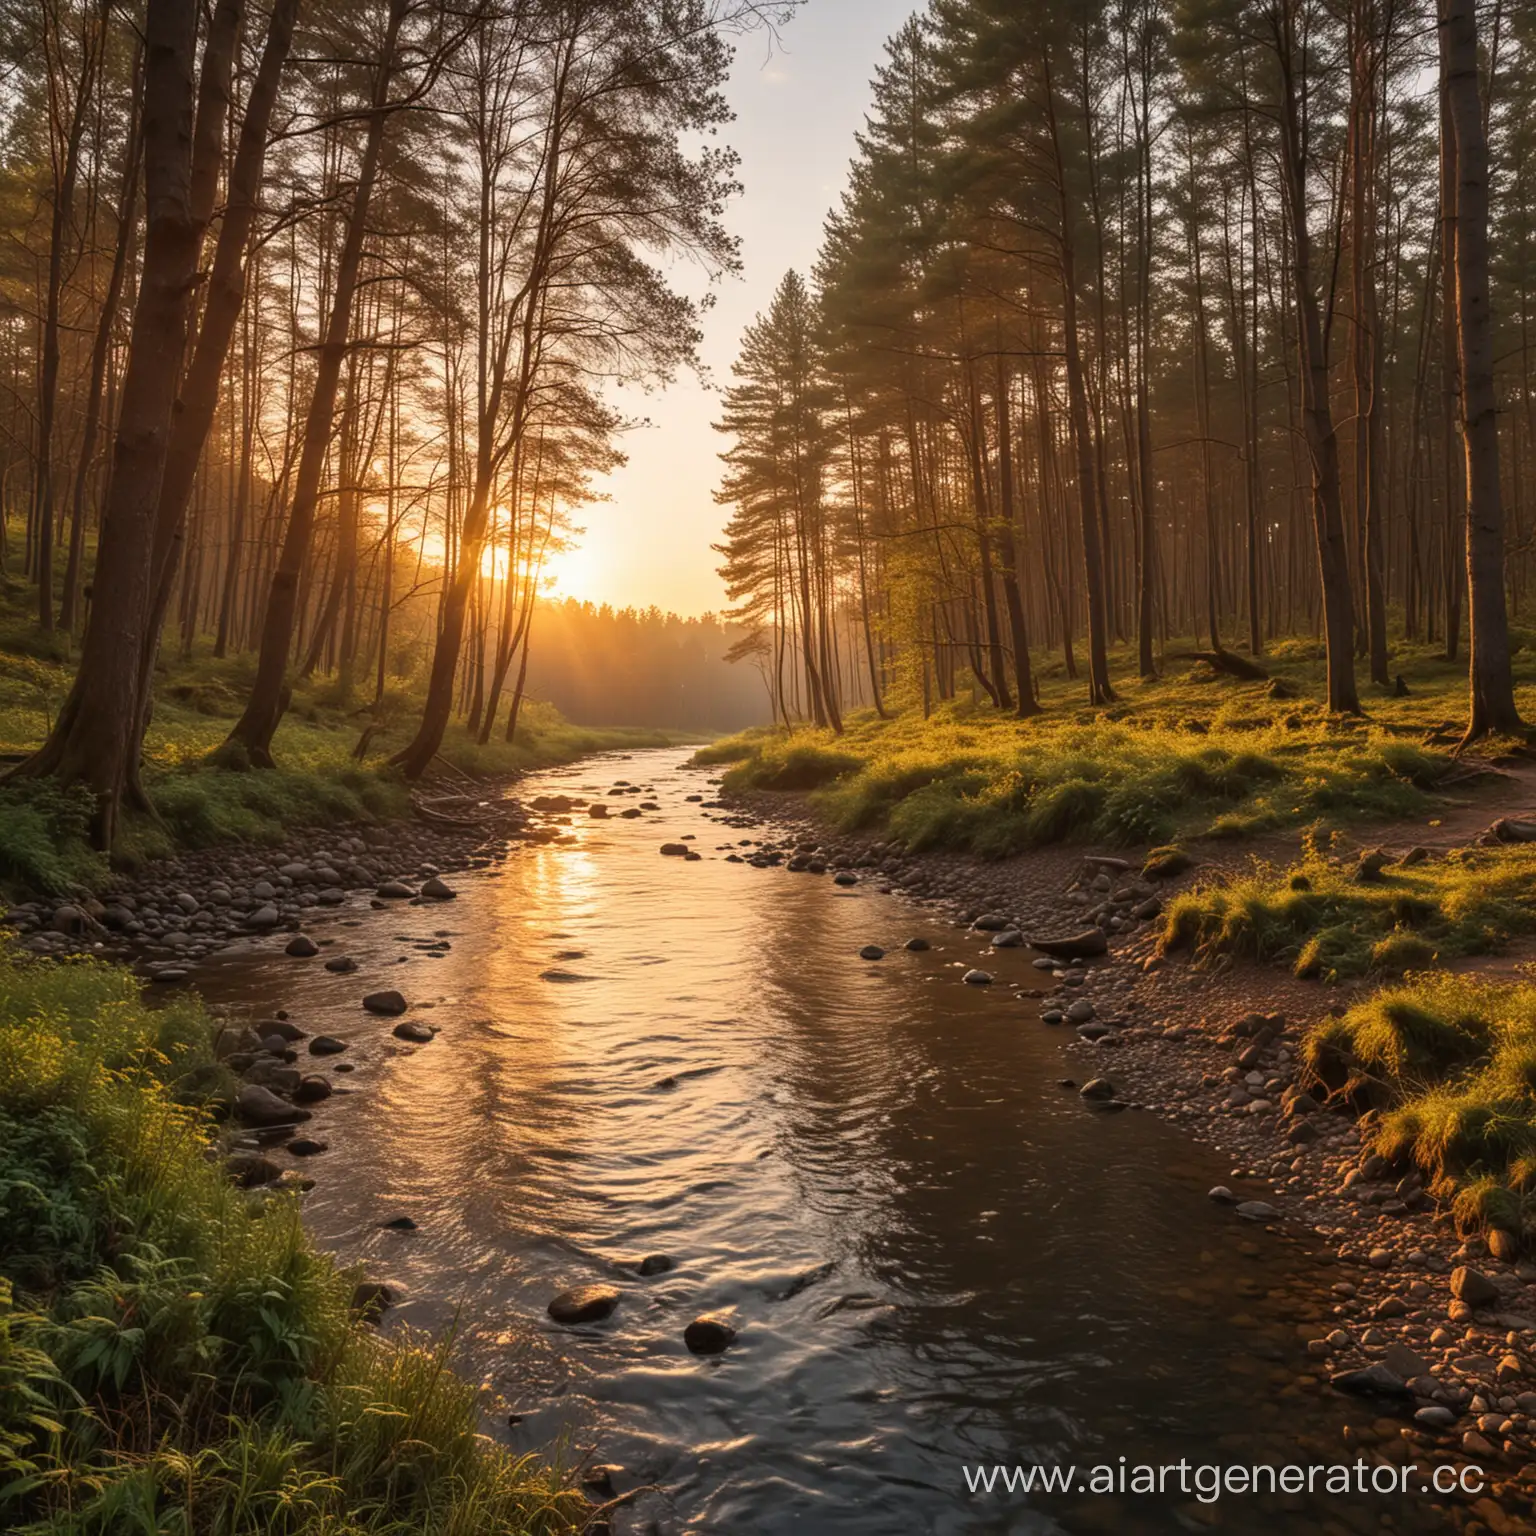 Tranquil-Sunset-Scene-River-Flowing-Through-Forest